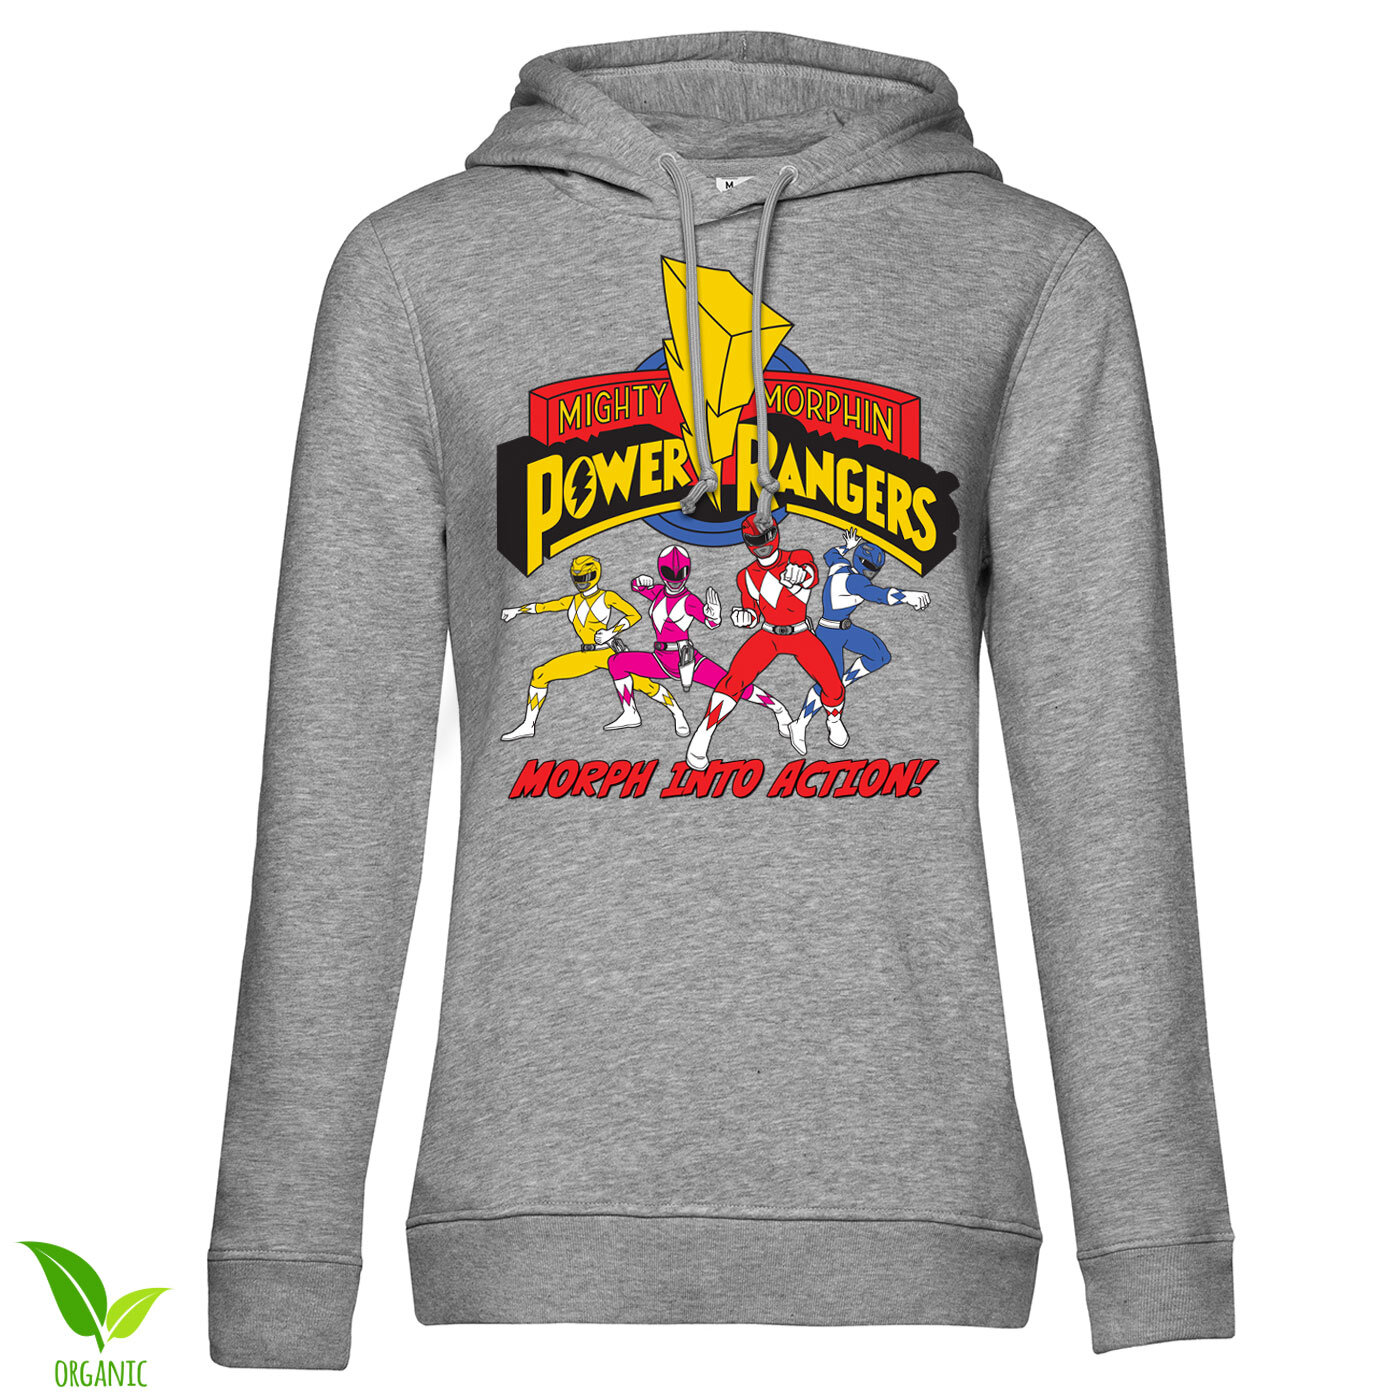 Morph Into Action Girls Hoodie